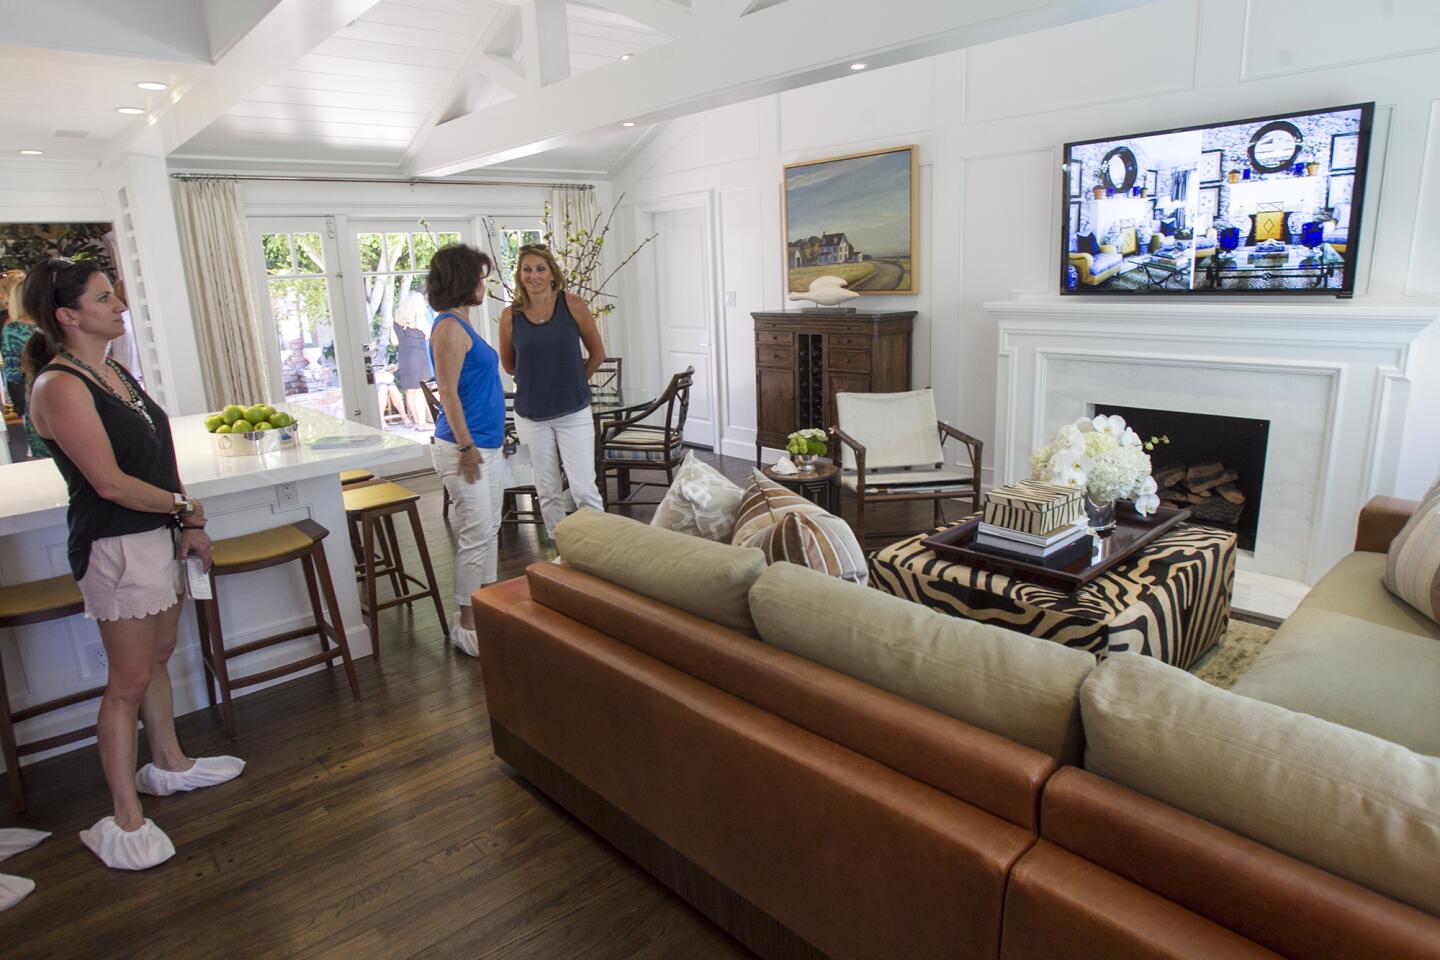 Guests tour the main living room at the Butera Residence on 700 East 15th Street on Thursday, May 15. (Scott Smeltzer - Daily Pilot)